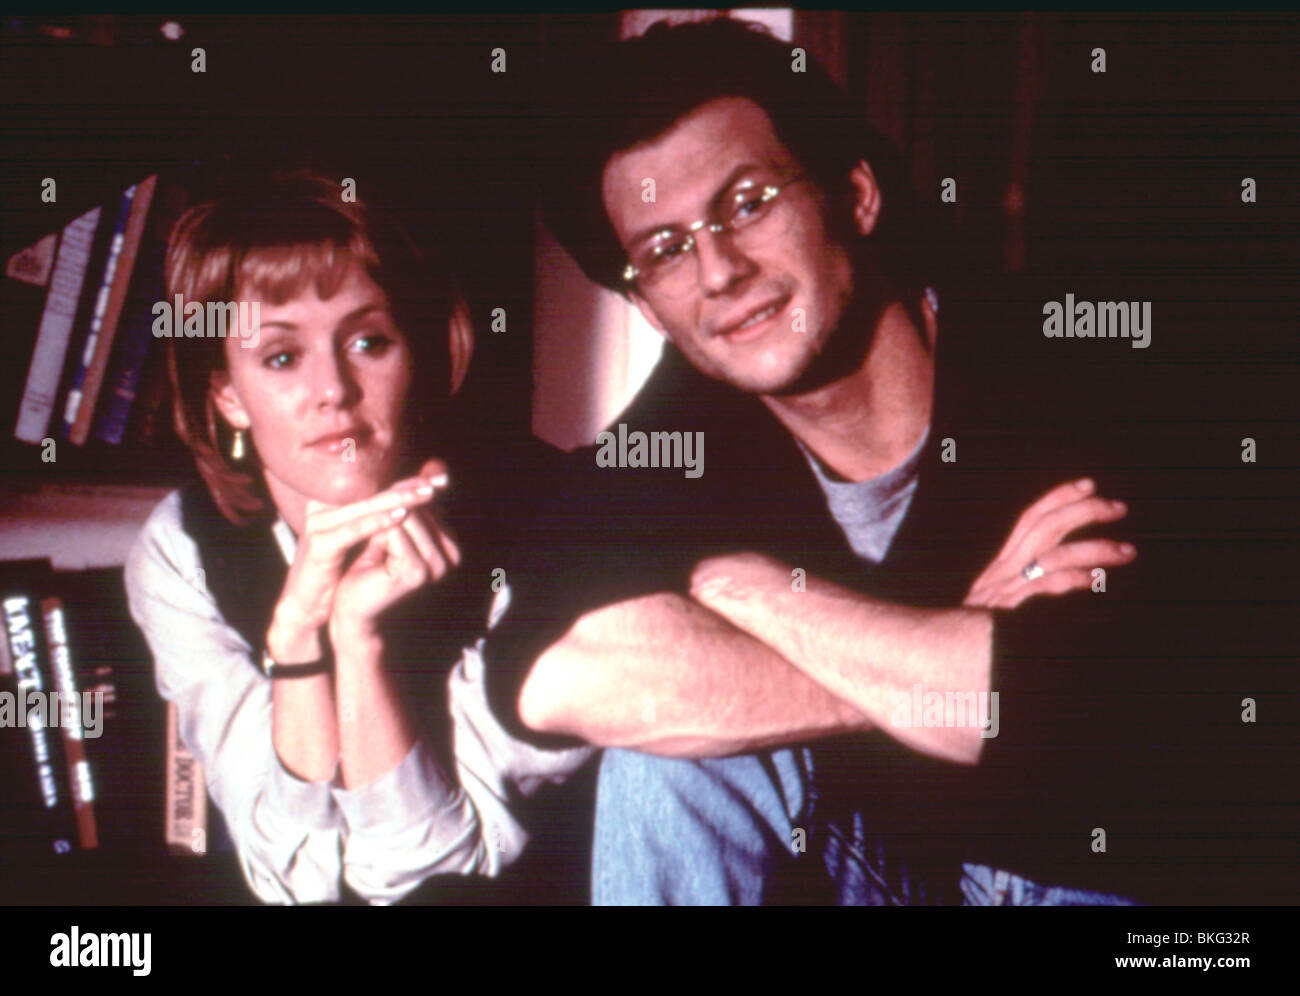 BED OF ROSES (1996) MARY STUART MASTERSON, CHRISTIAN SLATER BDRO 006 MOVIESTORE COLECTION LTD Stock Photo